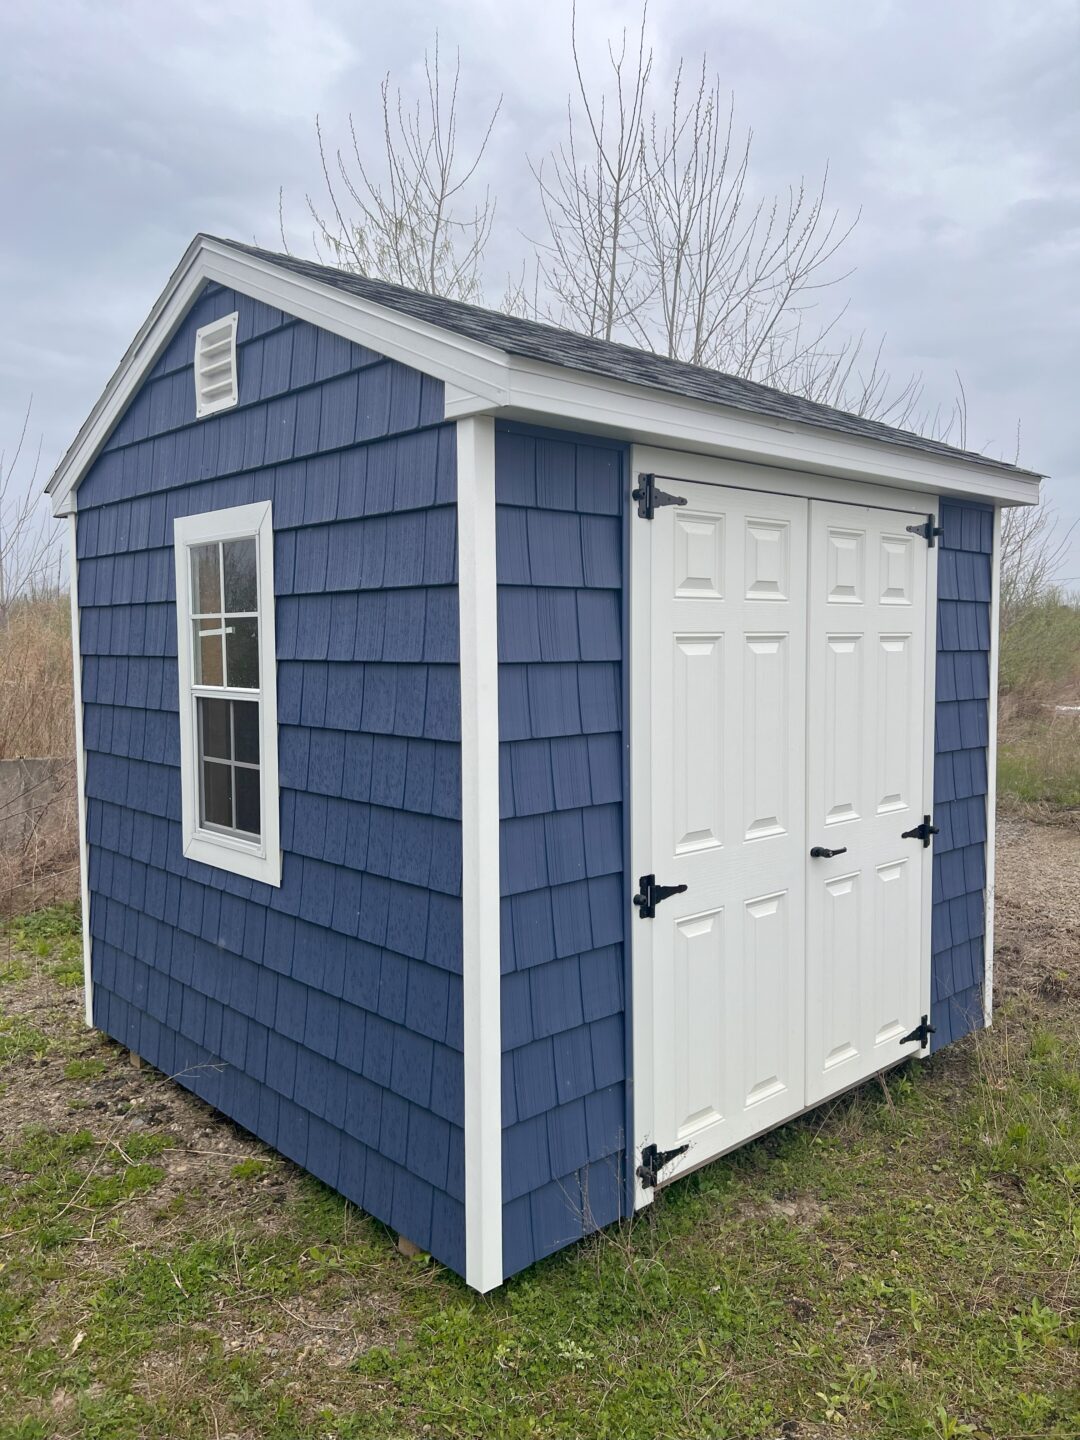 Small blue shed with white doors and windows